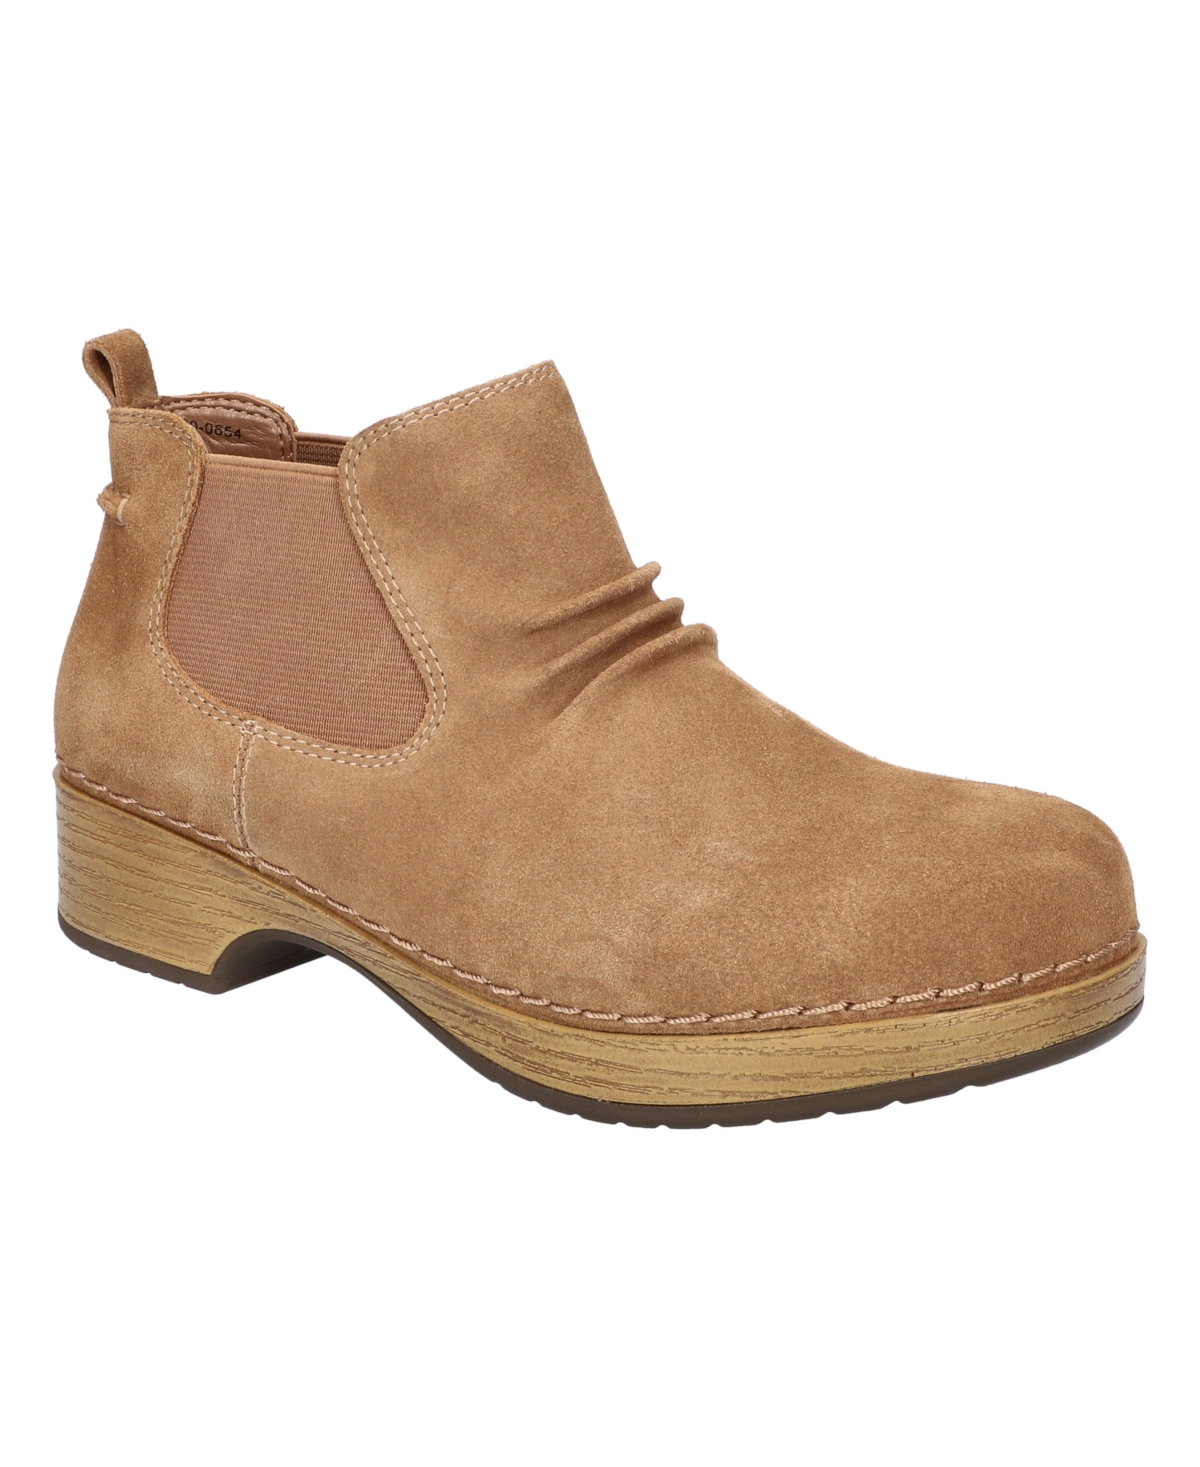 Women's Sure thing Slip Resistant Chelsea Boots - Biscuit Suede Leather